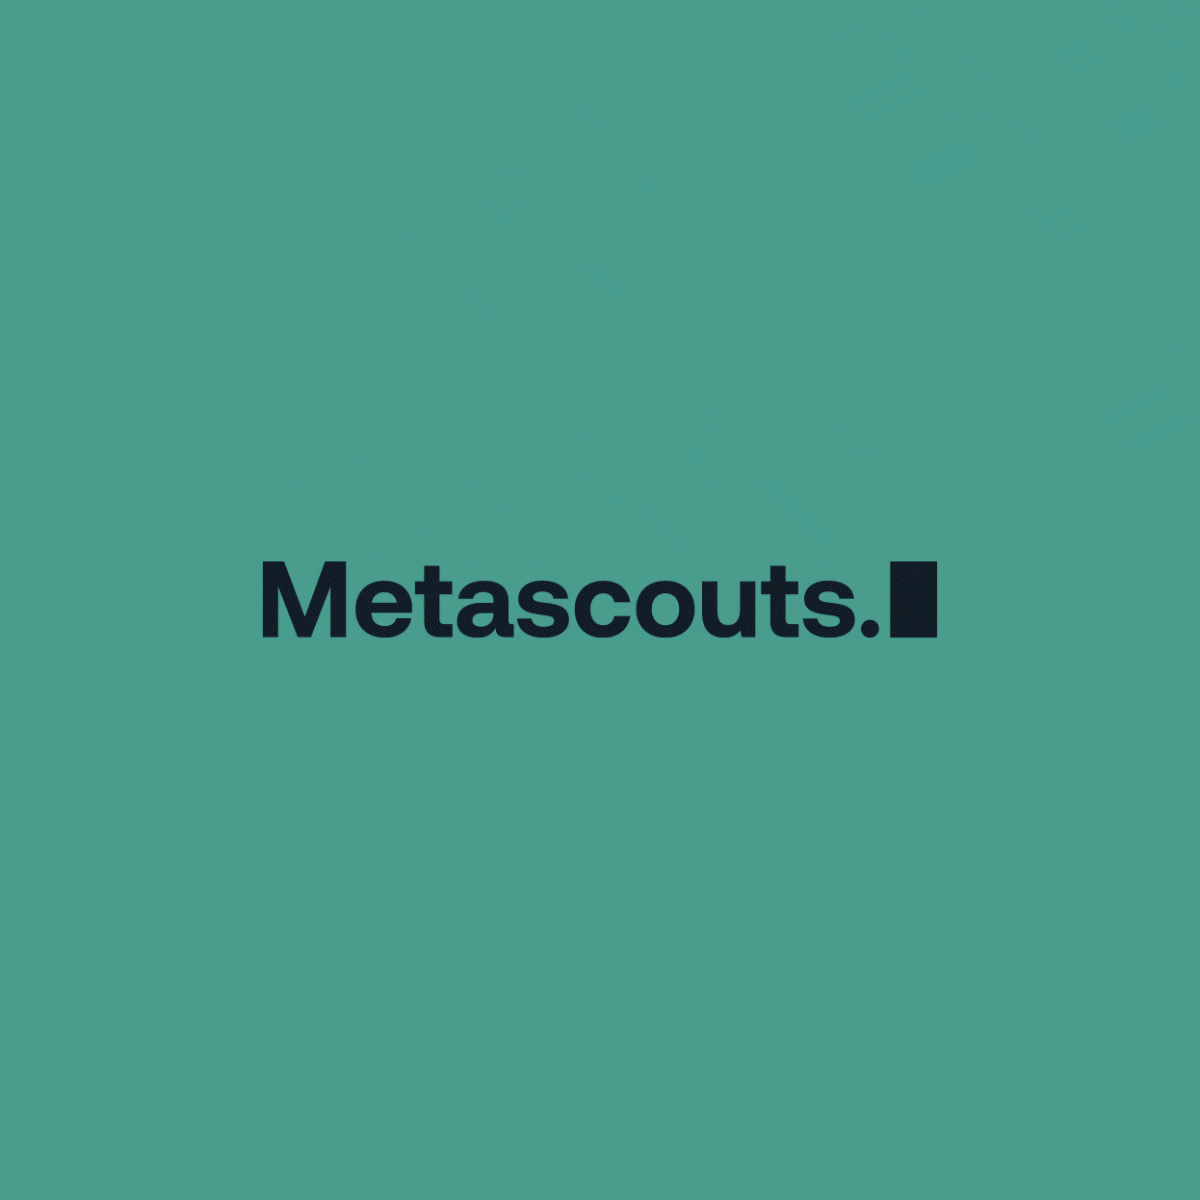 Metascouts